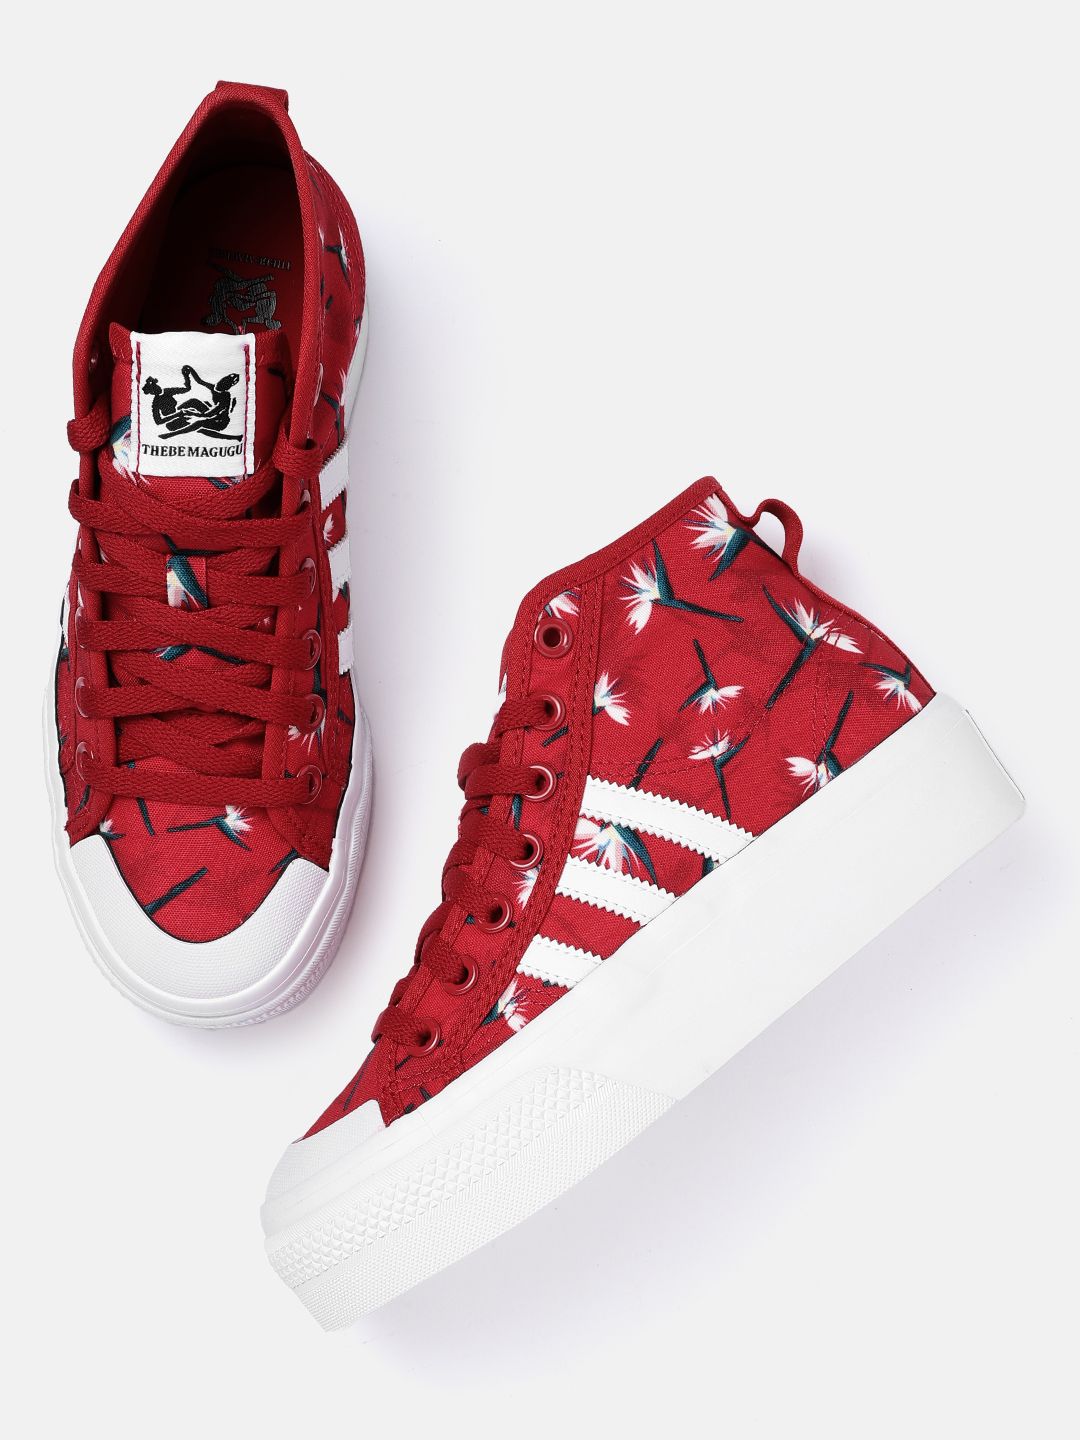 ADIDAS Originals Women Red & White Floral Printed Thebe Magugu Nizza Platform Mid Sneakers Price in India